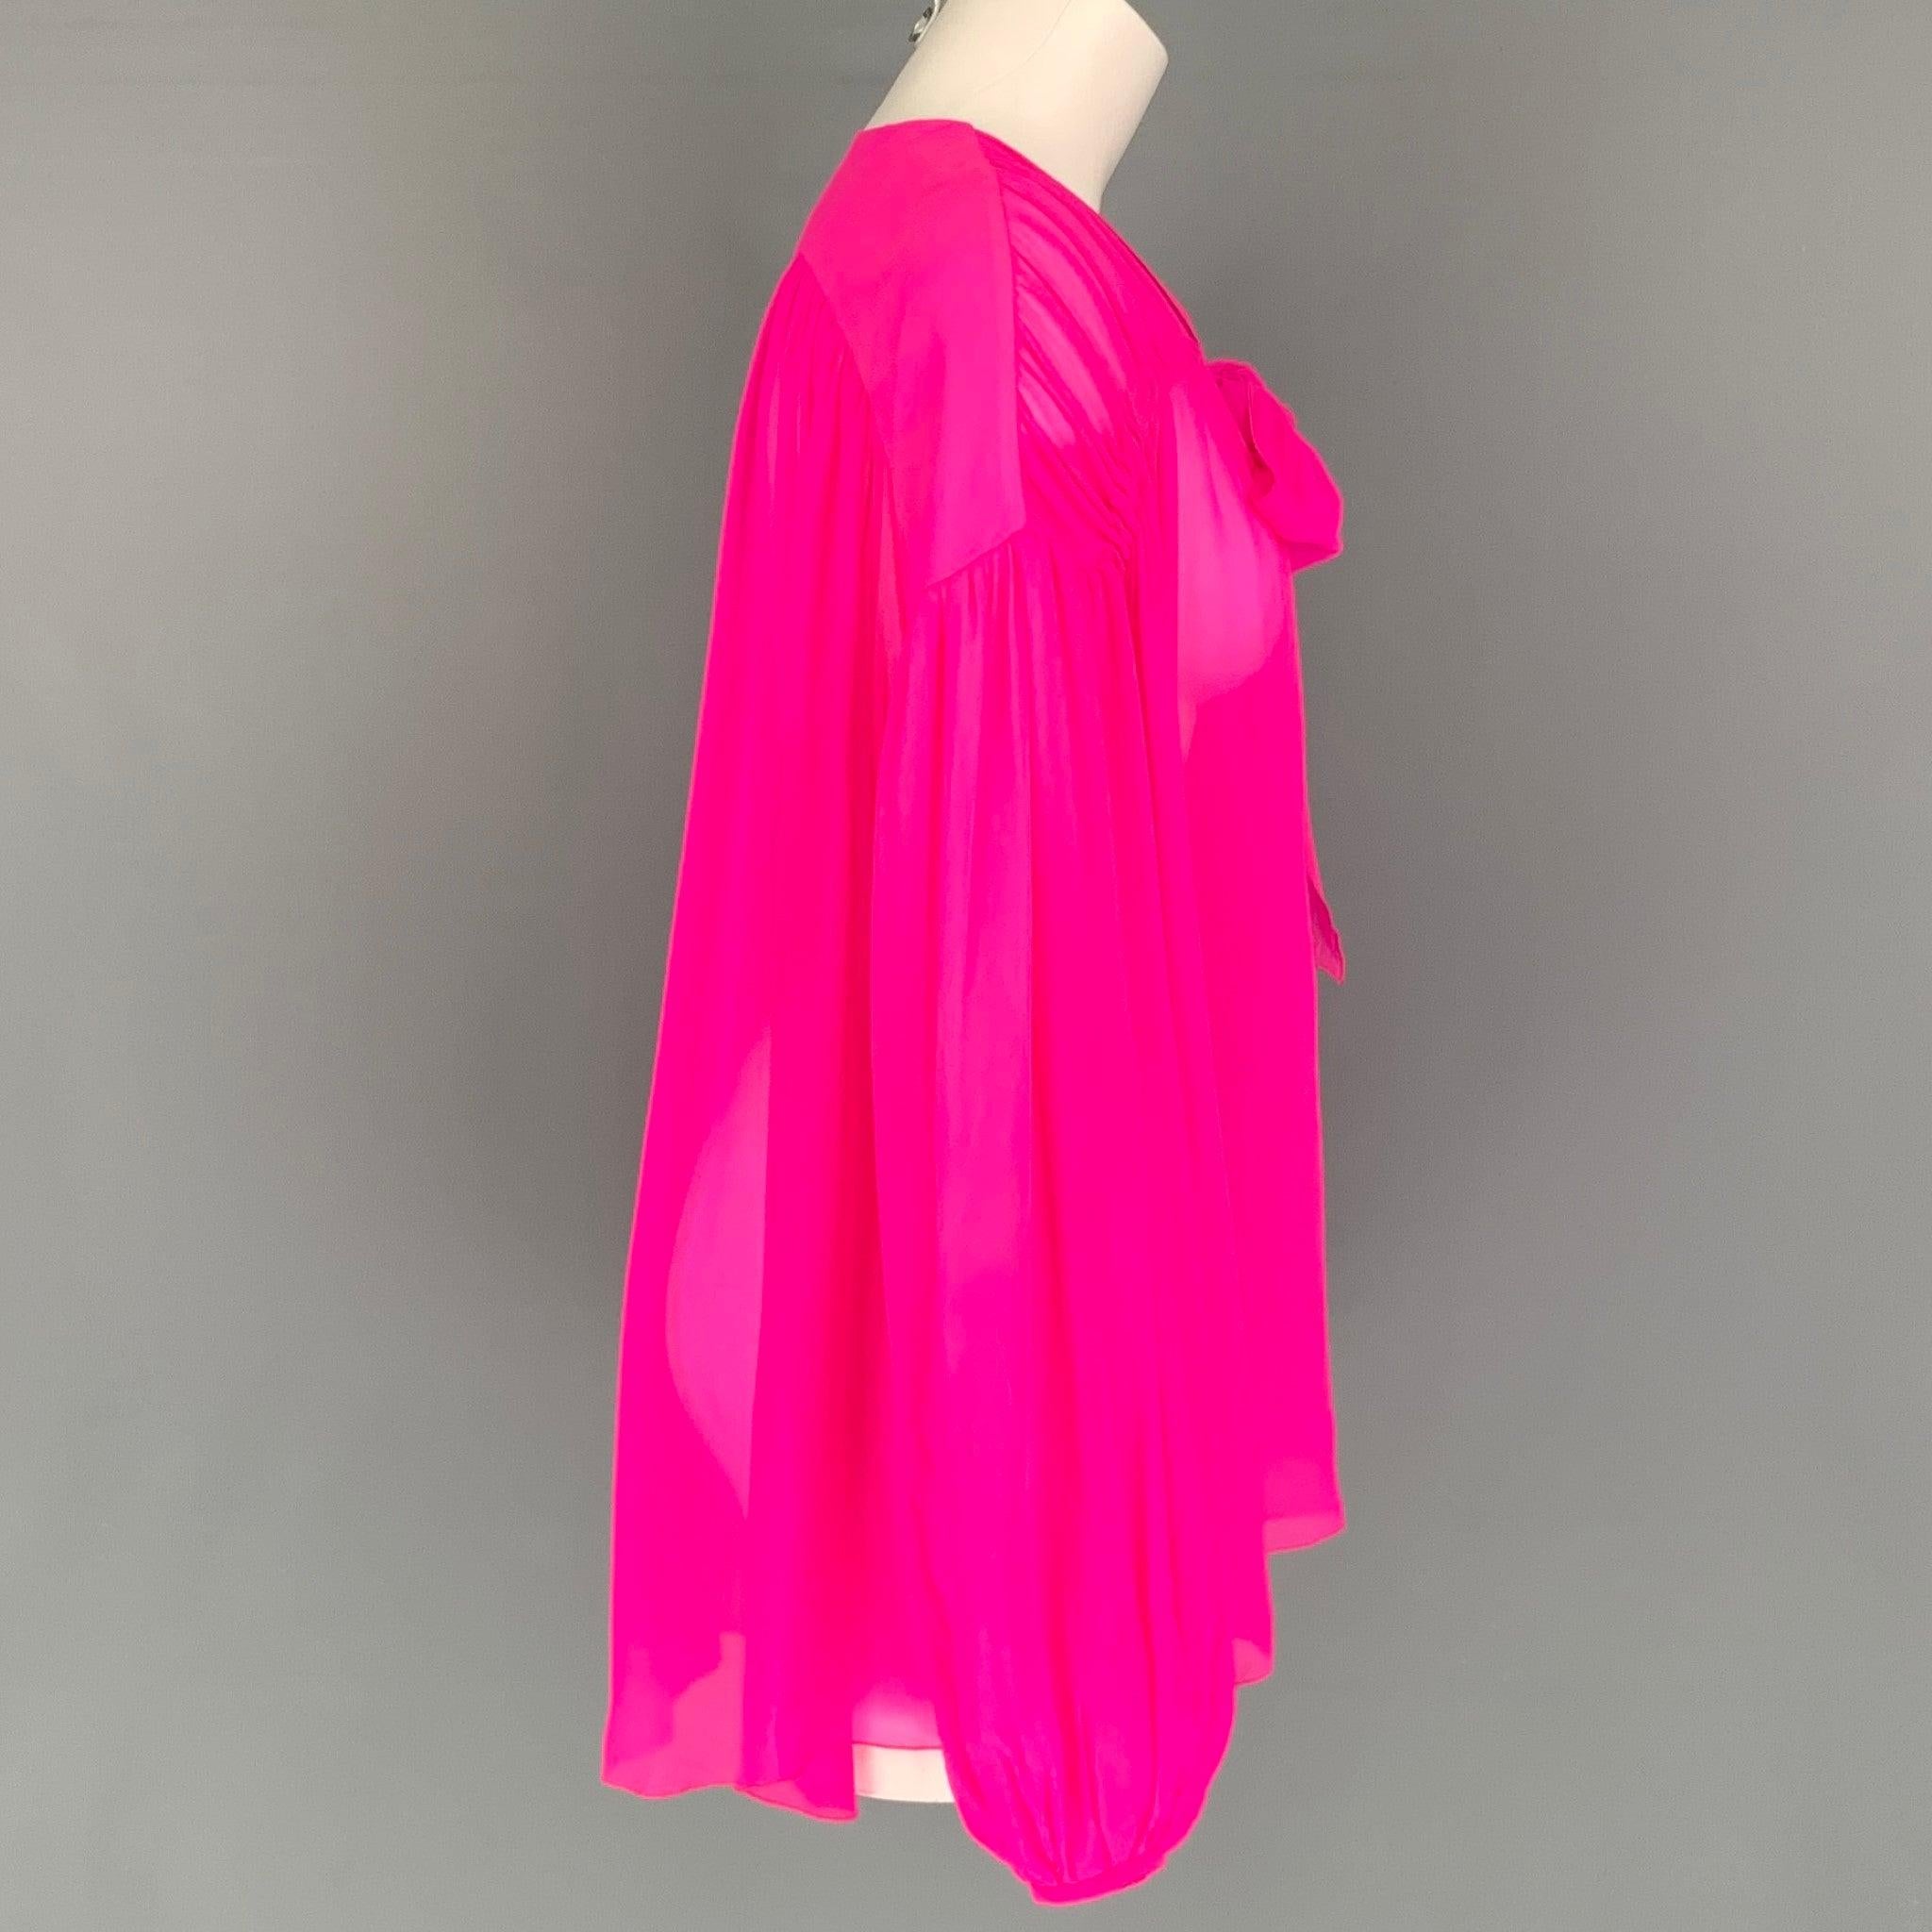 GIAMBATTISTA VALLI long sleeve tunic comes in a pink silk fabric featuring a see through style, ballon sleeves and neckline tie. Made in Italy.Very Good Pre-Owned Condition. Minor Marks at Back. 

Marked:   Not Marked. 

Measurements: 
 
Shoulder: